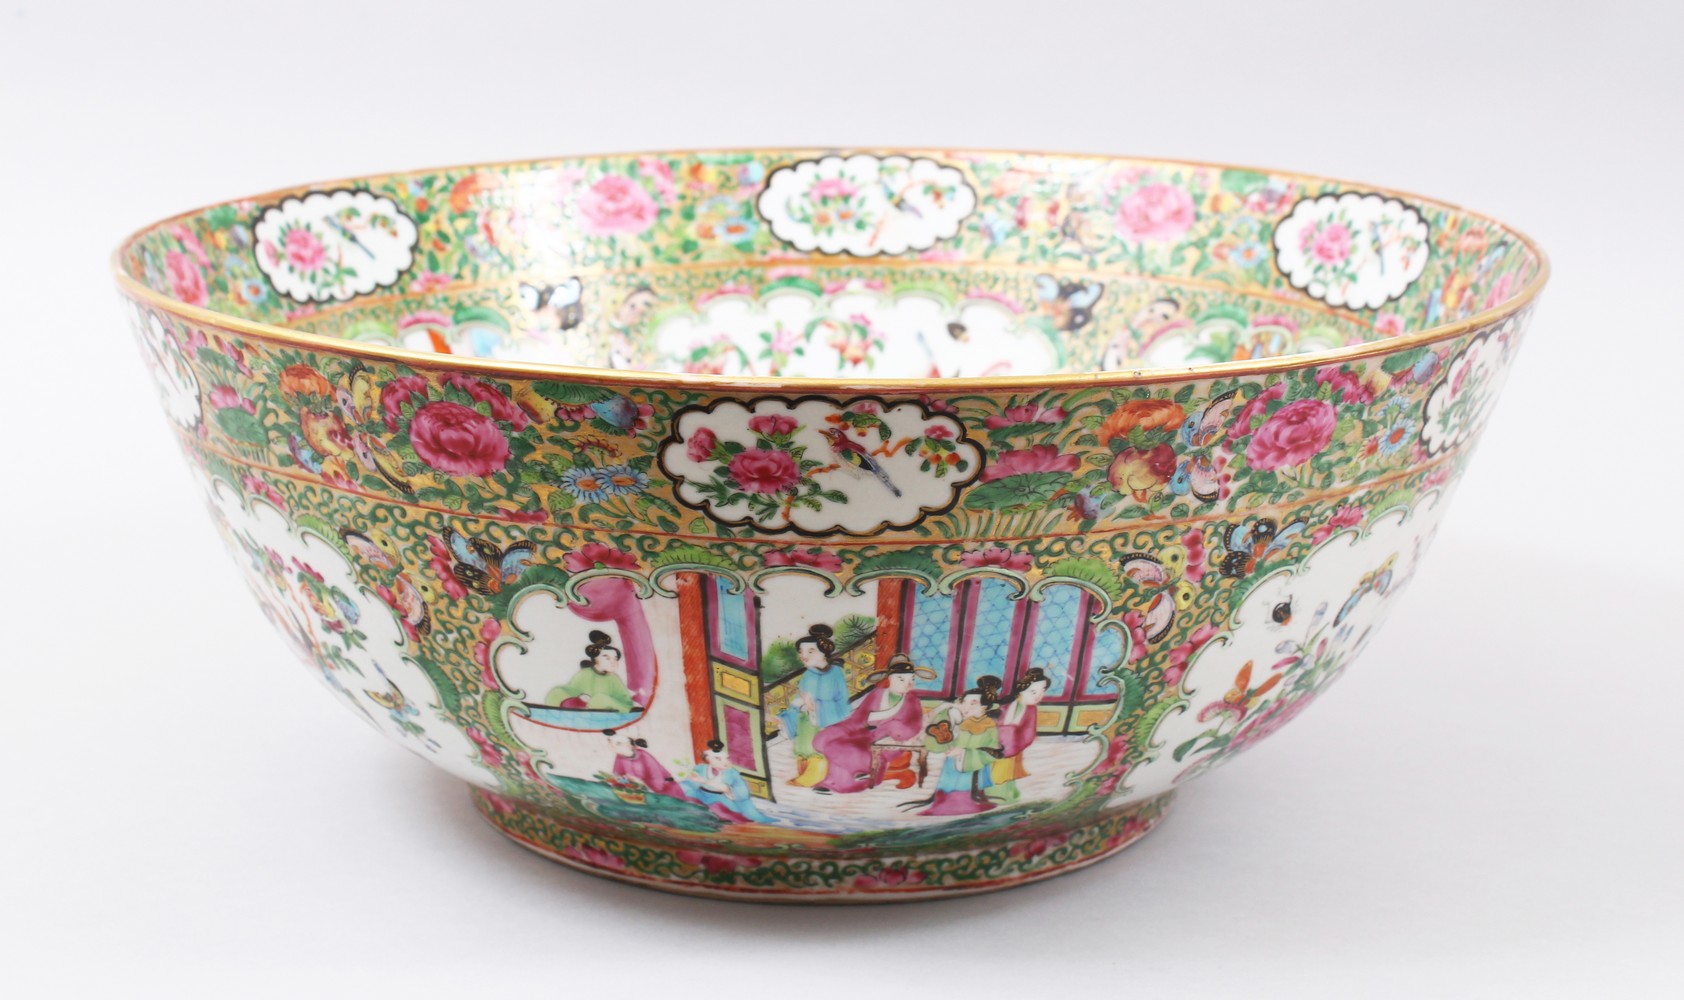 A GOOD 19TH CENTURY CHINESE CANTON FAMILLE ROSE PORCELAIN BOWL / BASIN, the decoration with panels